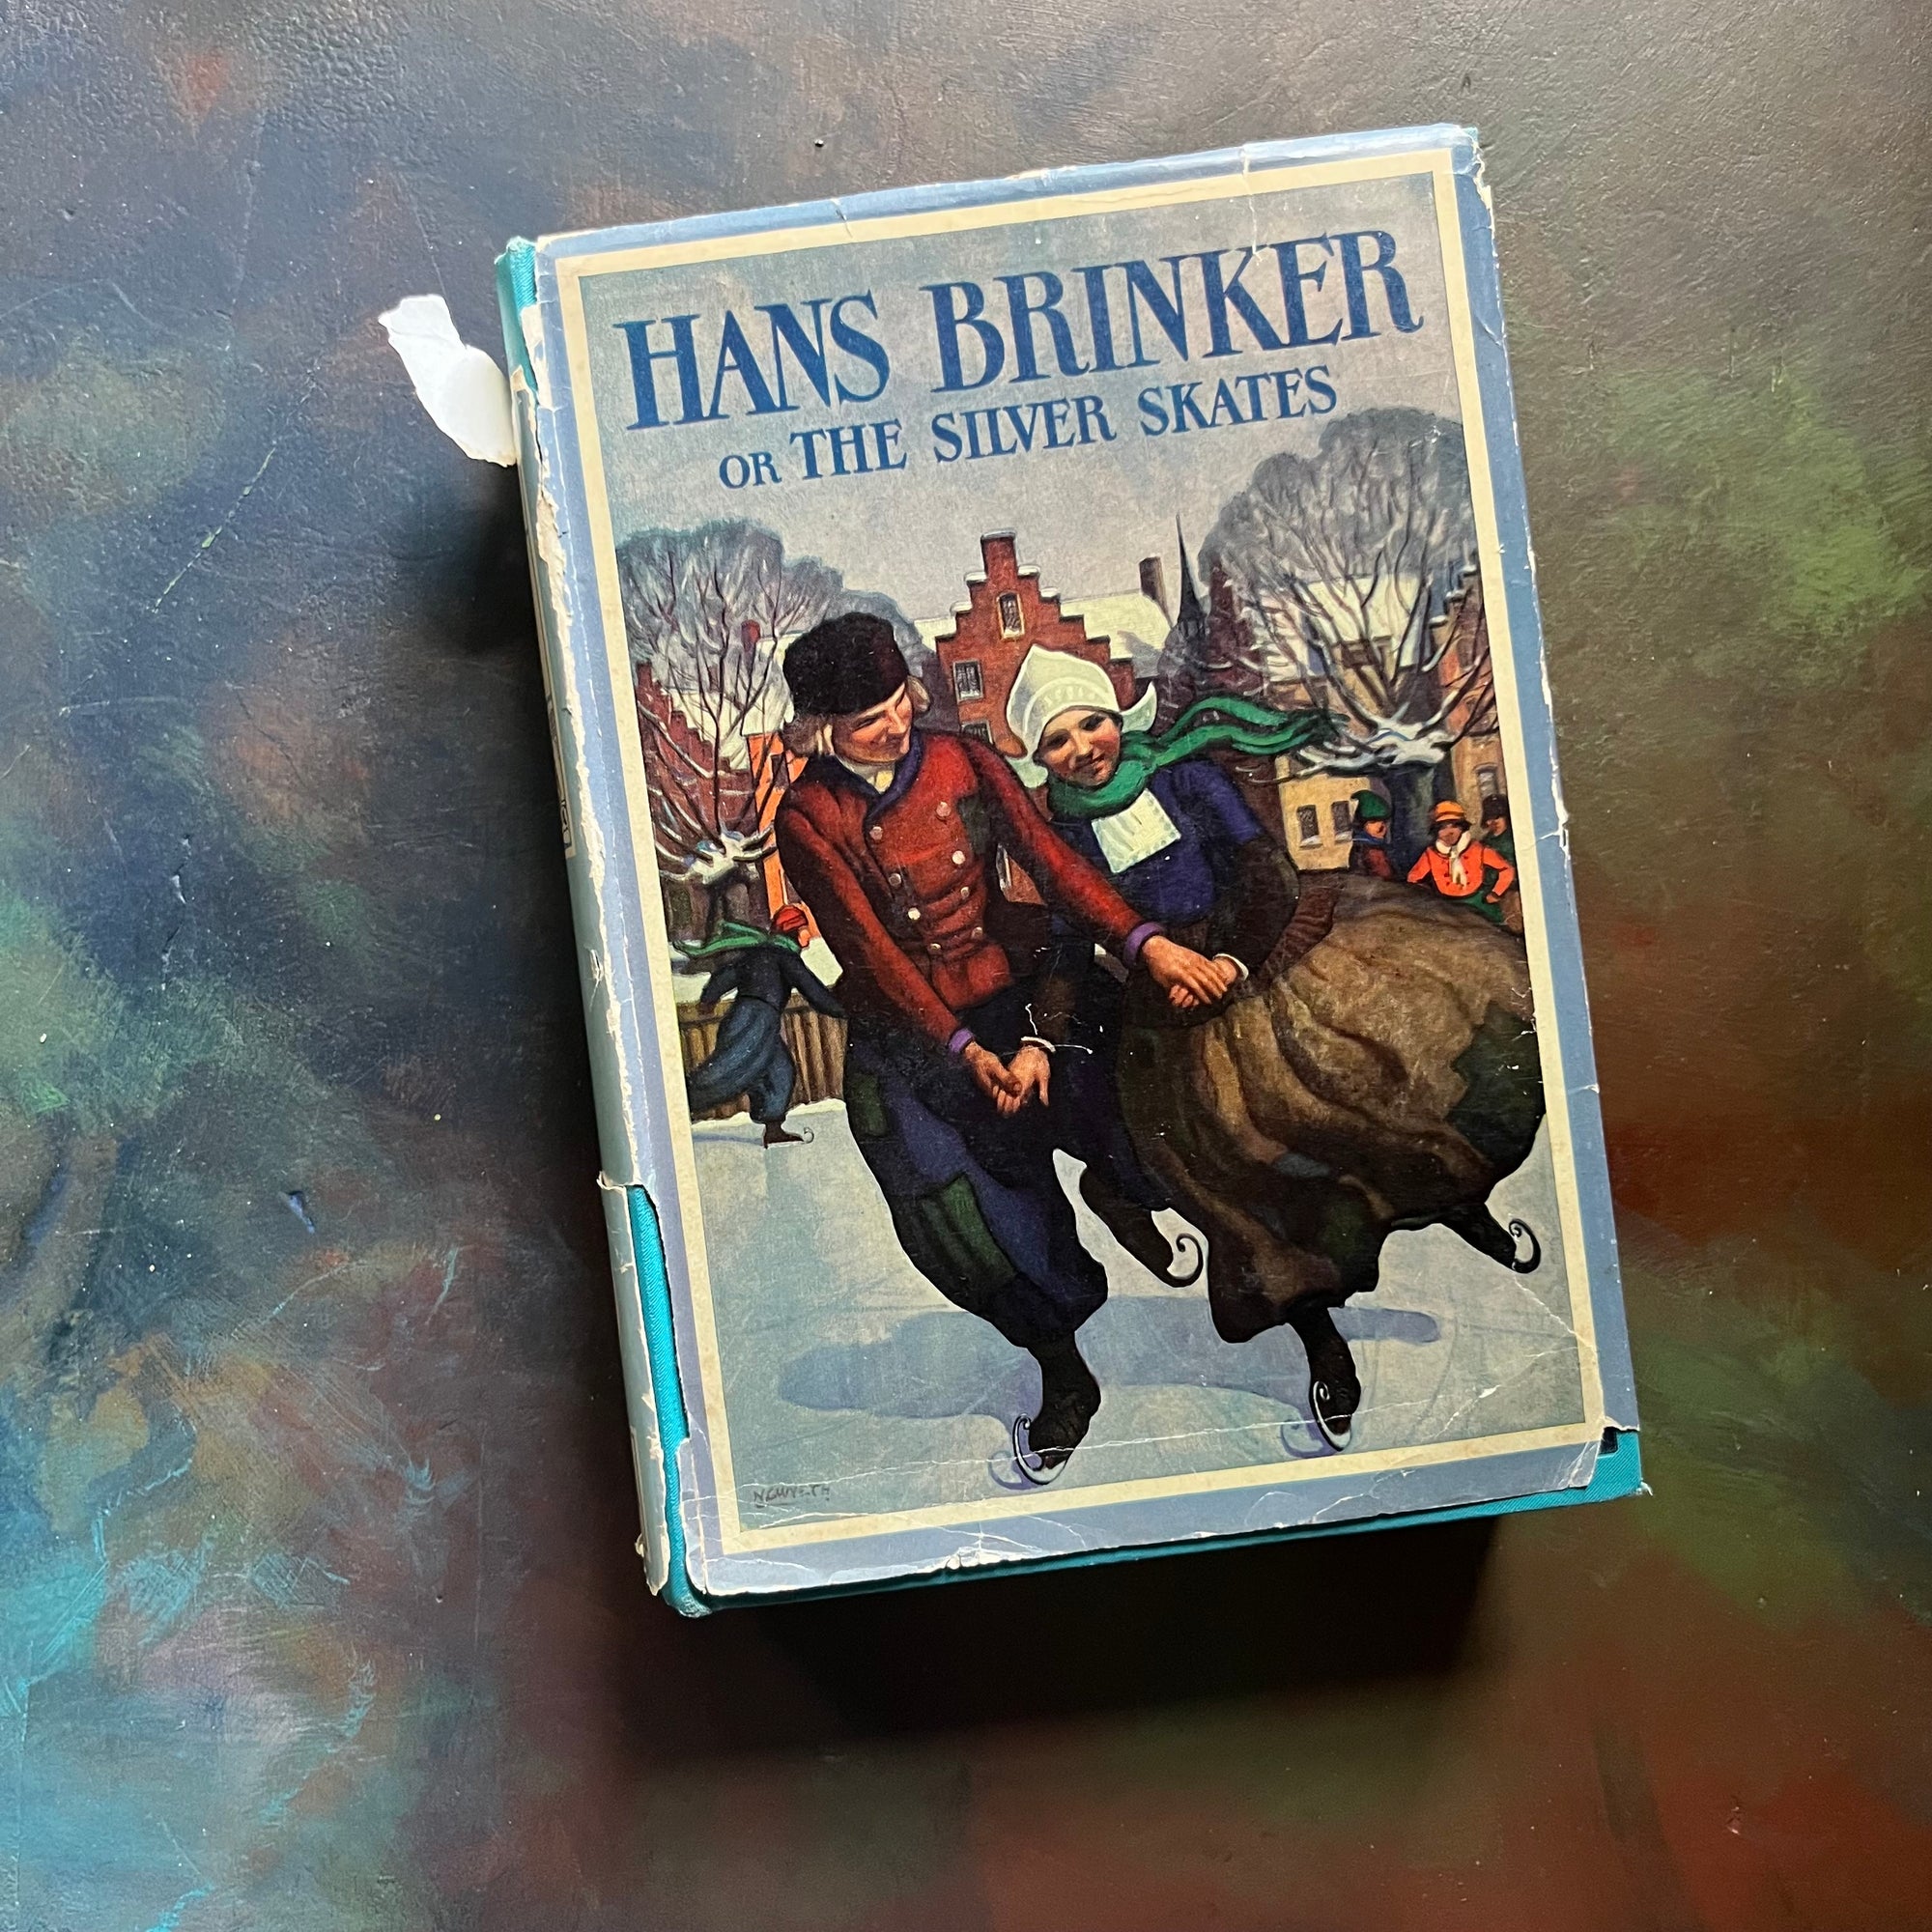 Hans Brinker or the Silver Skates by Mary Mapes Dodge with illustrations by N. C. Wyeth & Peter Hurd-antique children's chapter book-view of the dust jacket's front cover